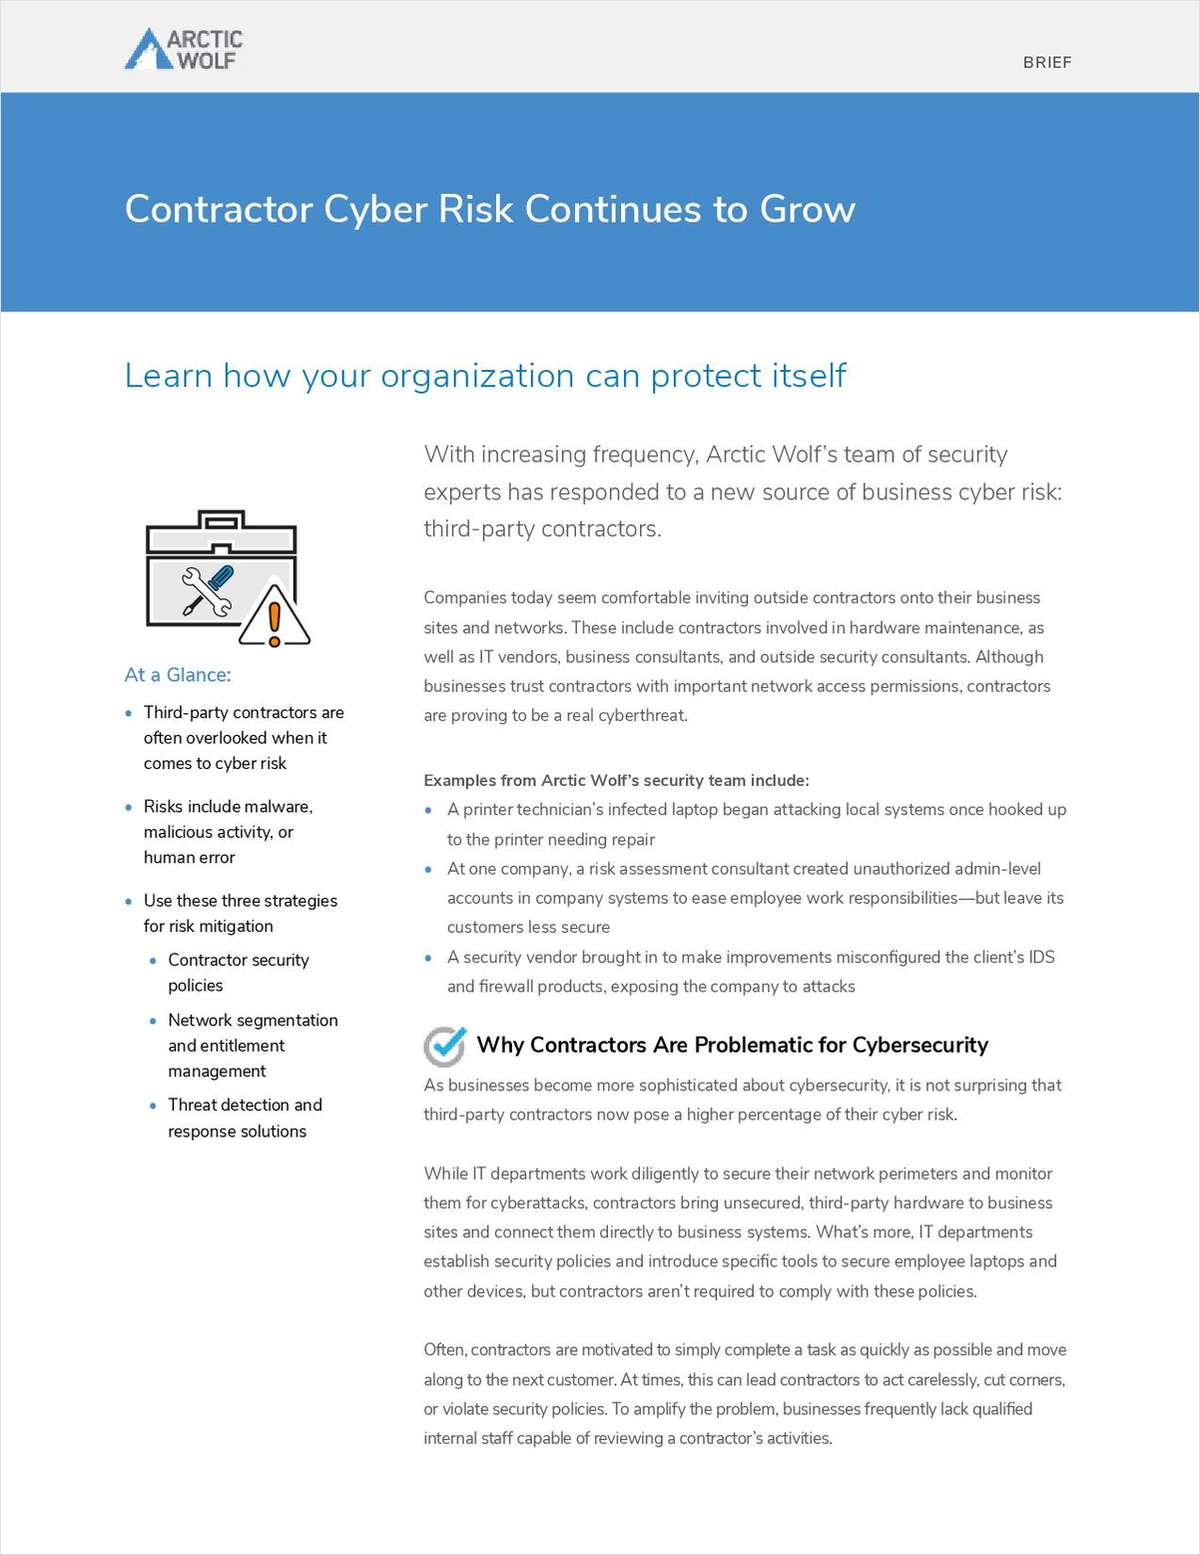 Contractor Cyber Risk Continues to Grow